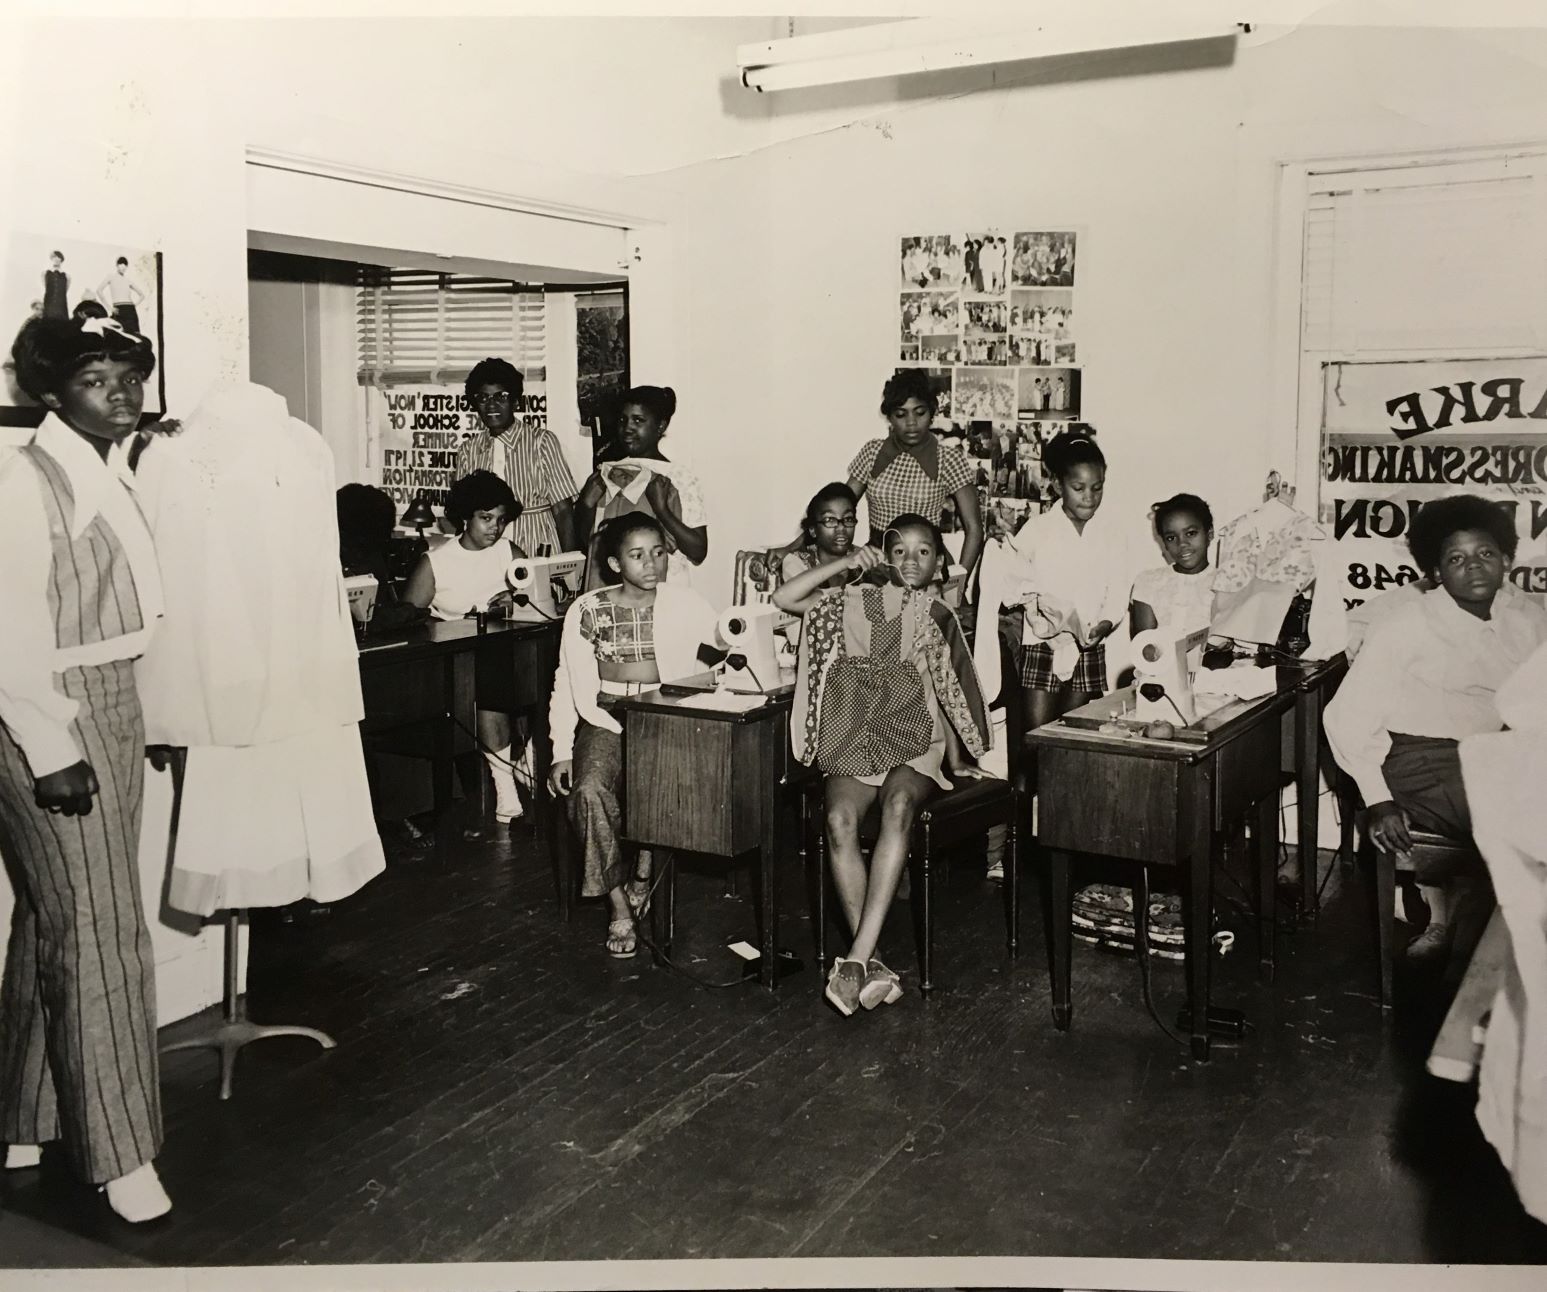 Students at the Clarke School of Dressmaking and Fashion Design